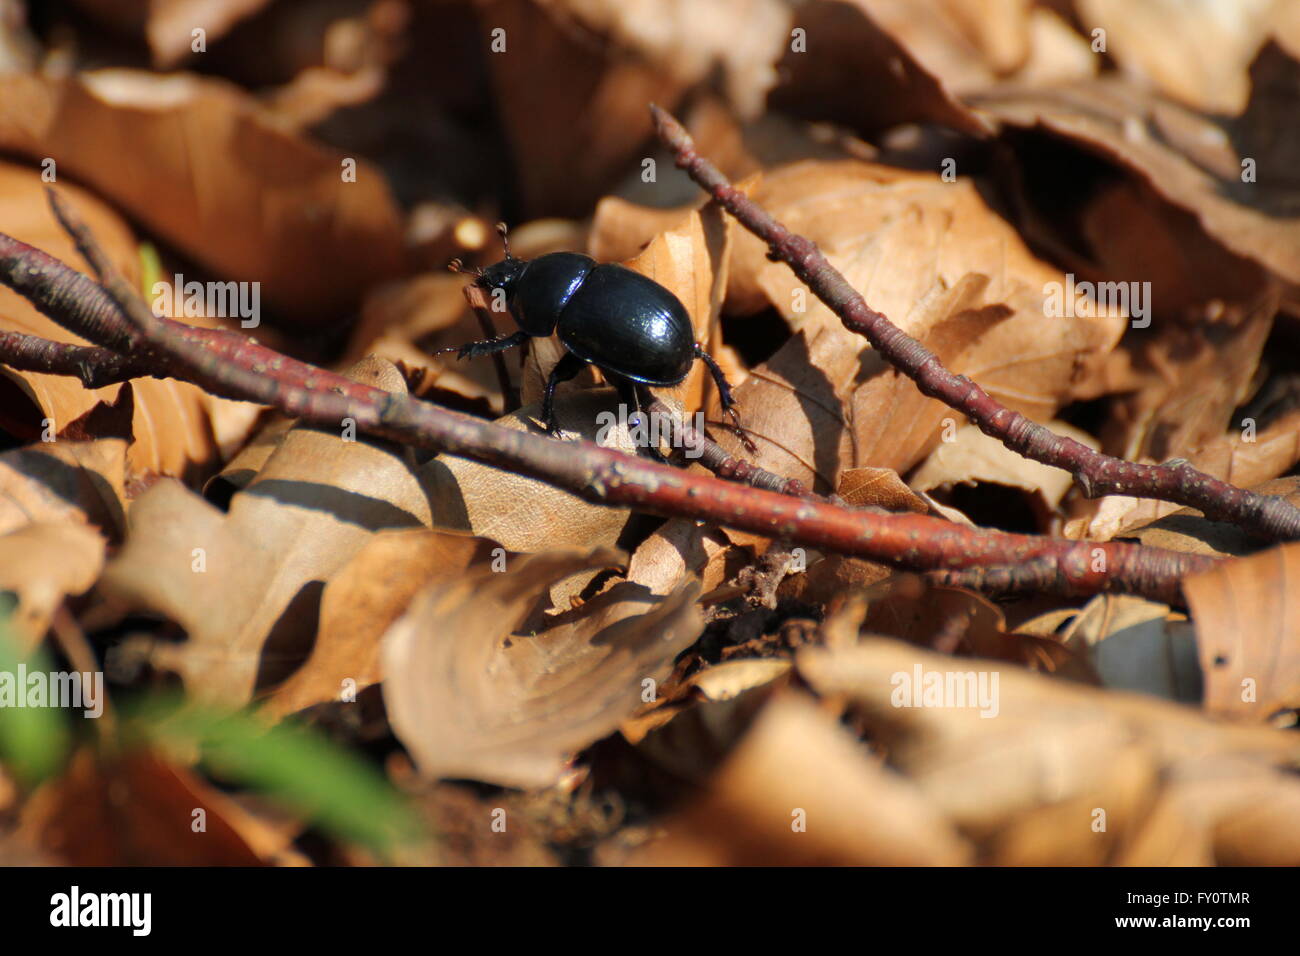 Dung beetle on brown leaves in a forest near Greifswald, Mecklenburg-Vorpommern, Germany. Stock Photo